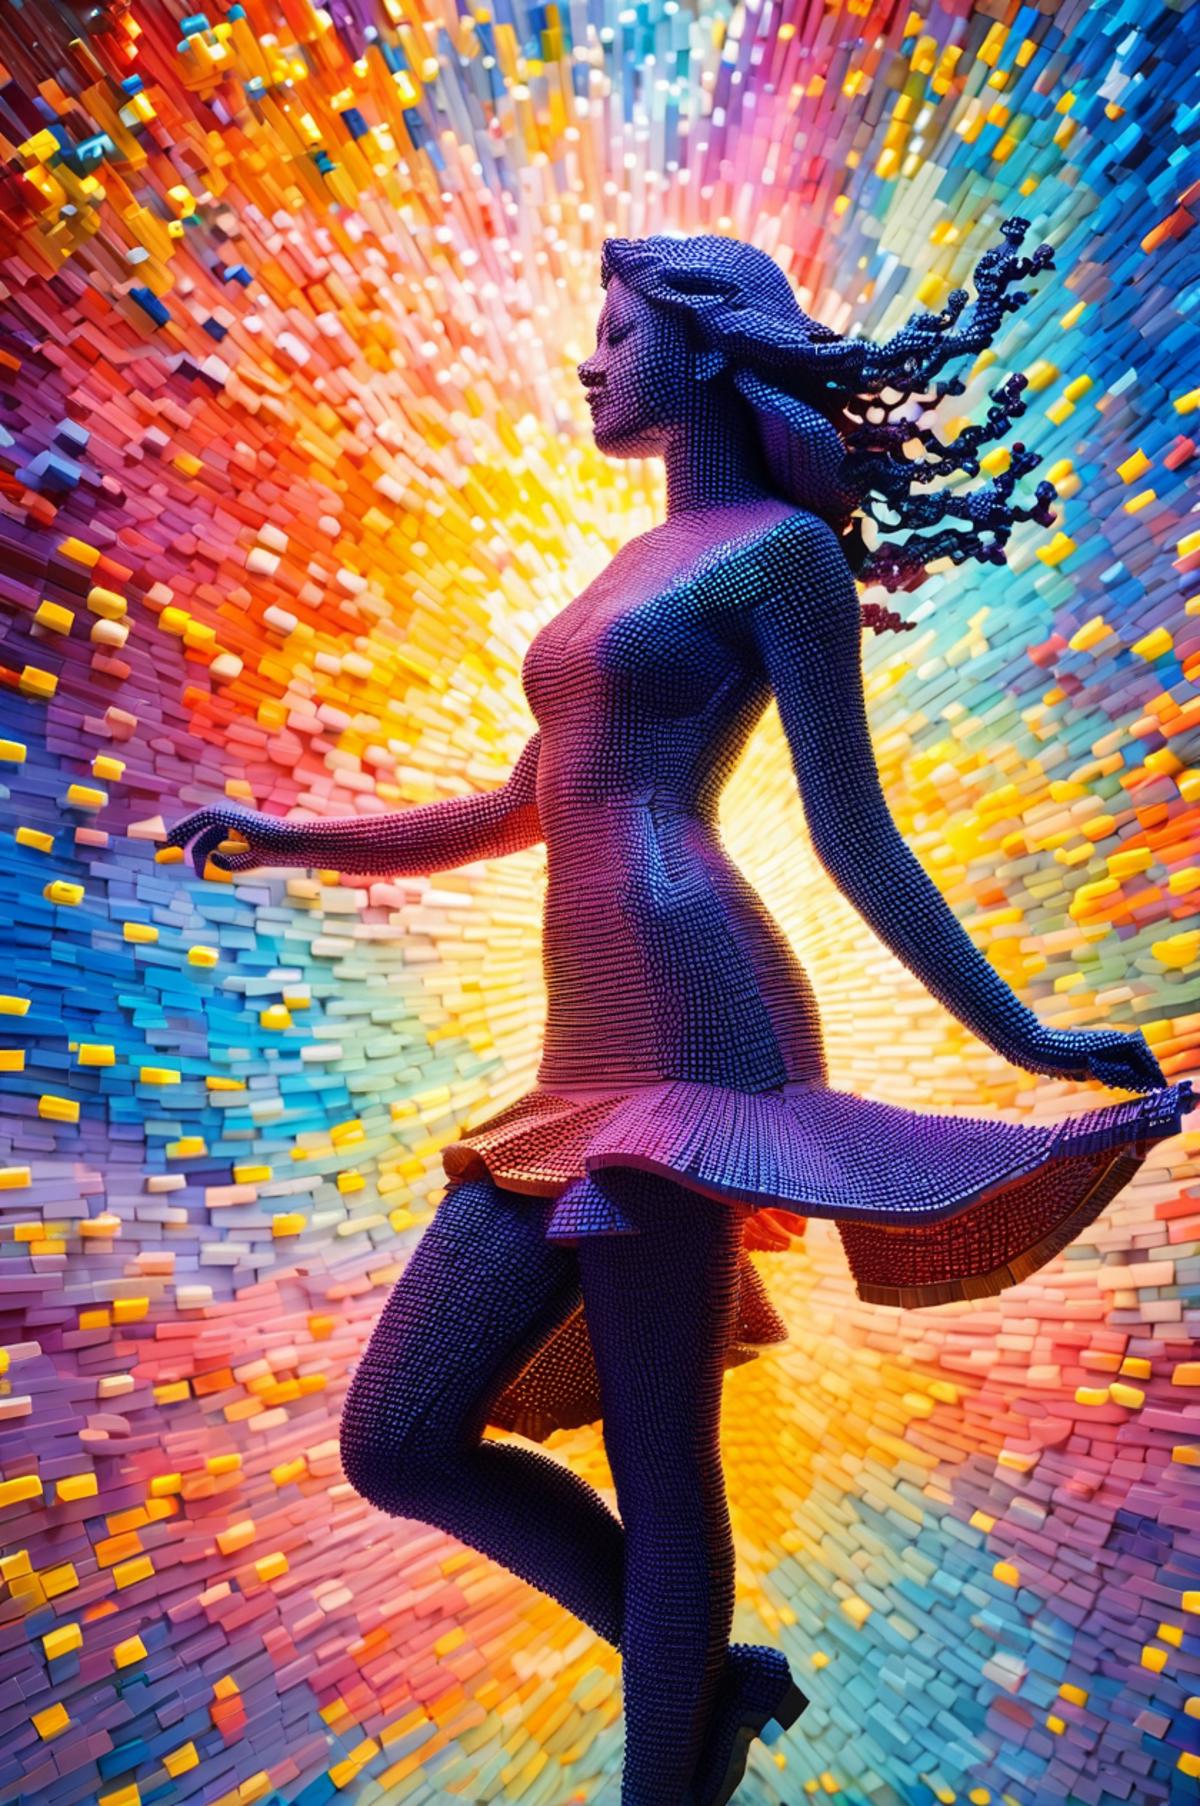 A woman with a dress made of colored bricks poses in front of a colorful background.